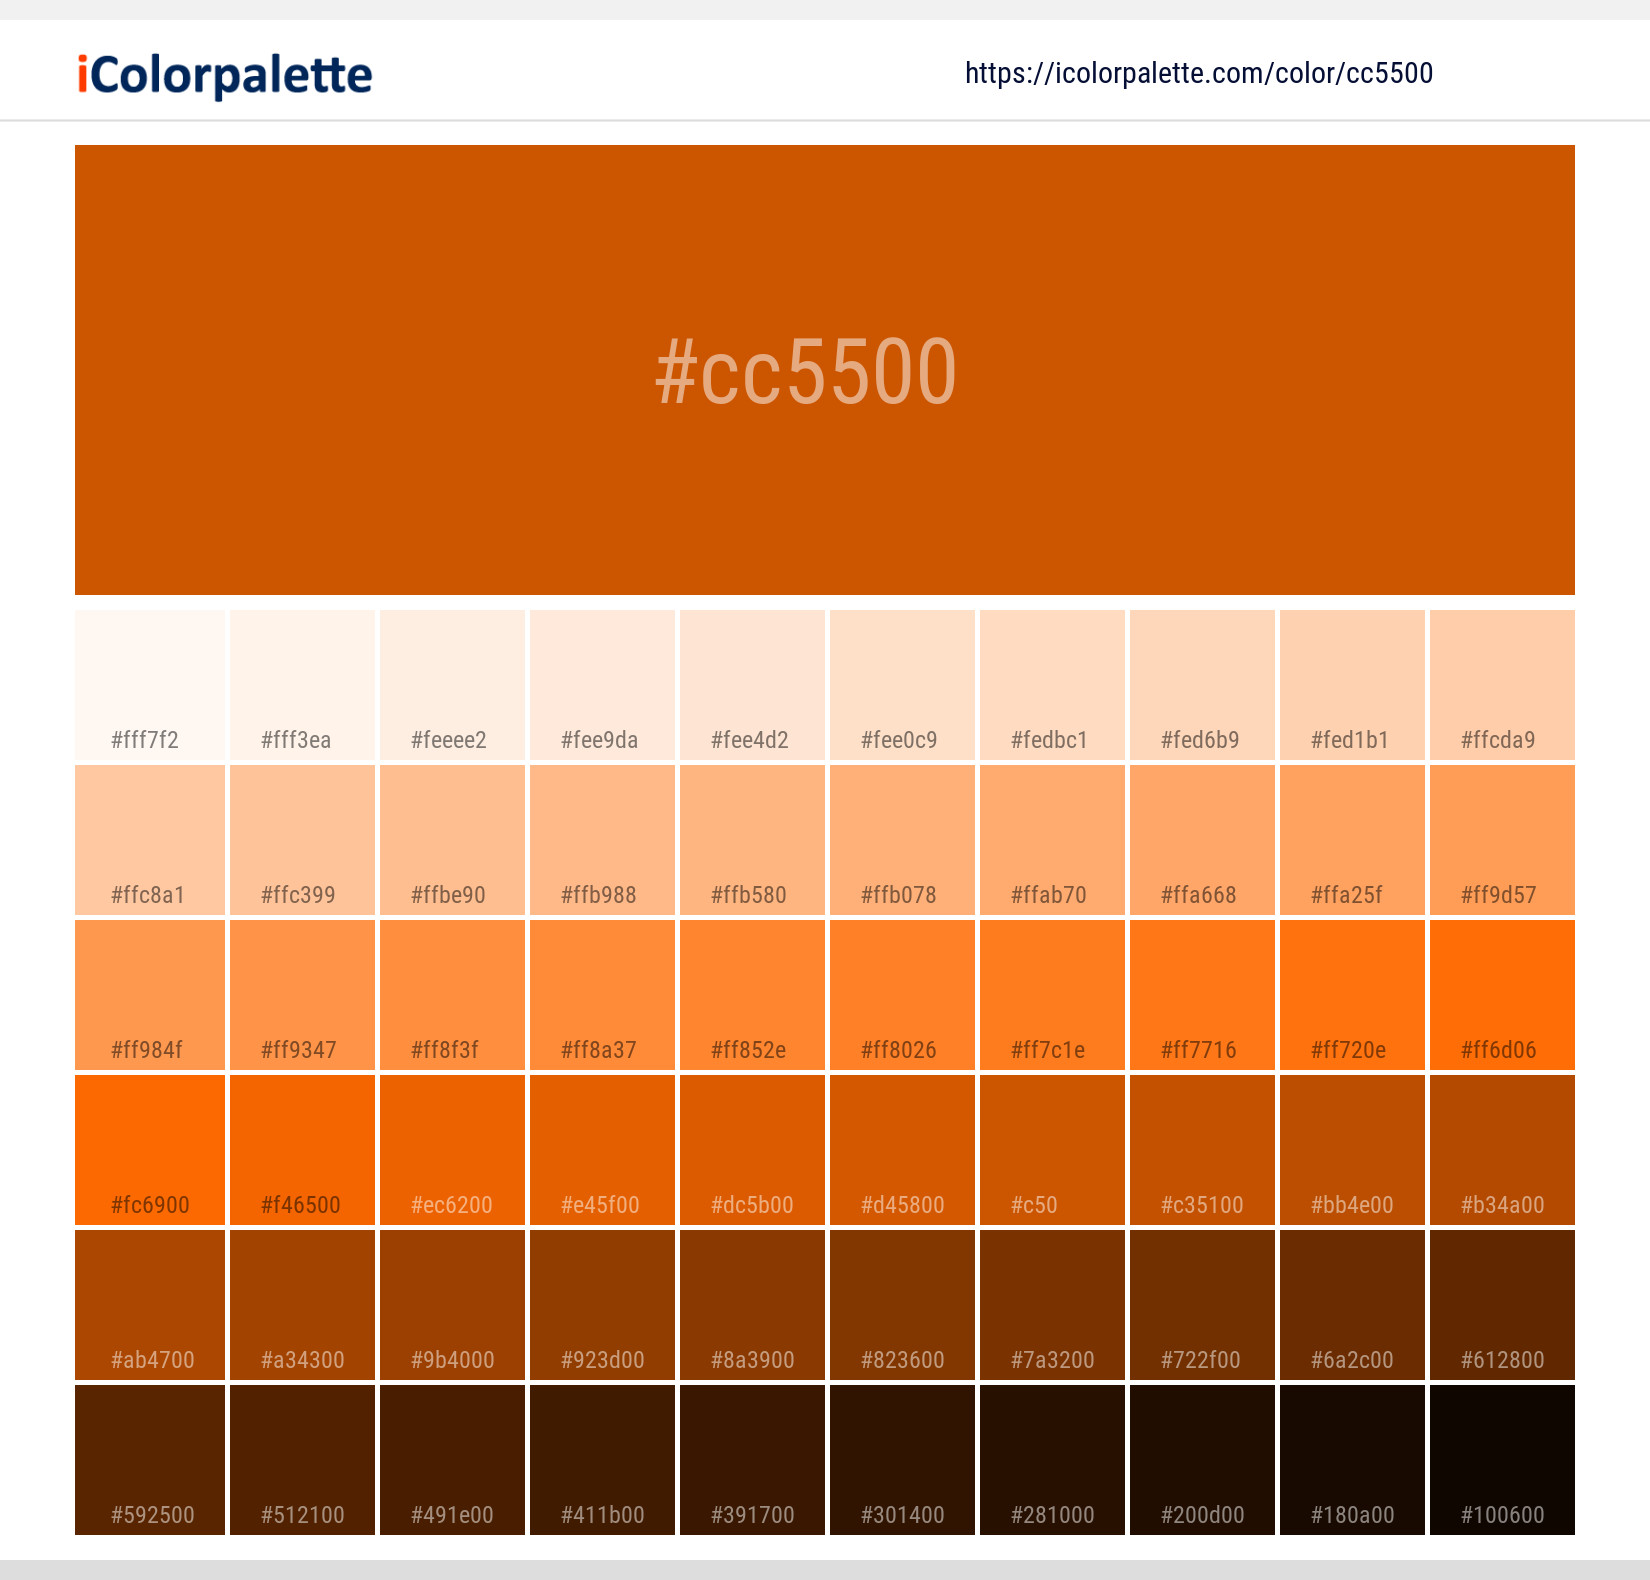 https://www.icolorpalette.com/download/shades/cc5500_color_shades.jpg